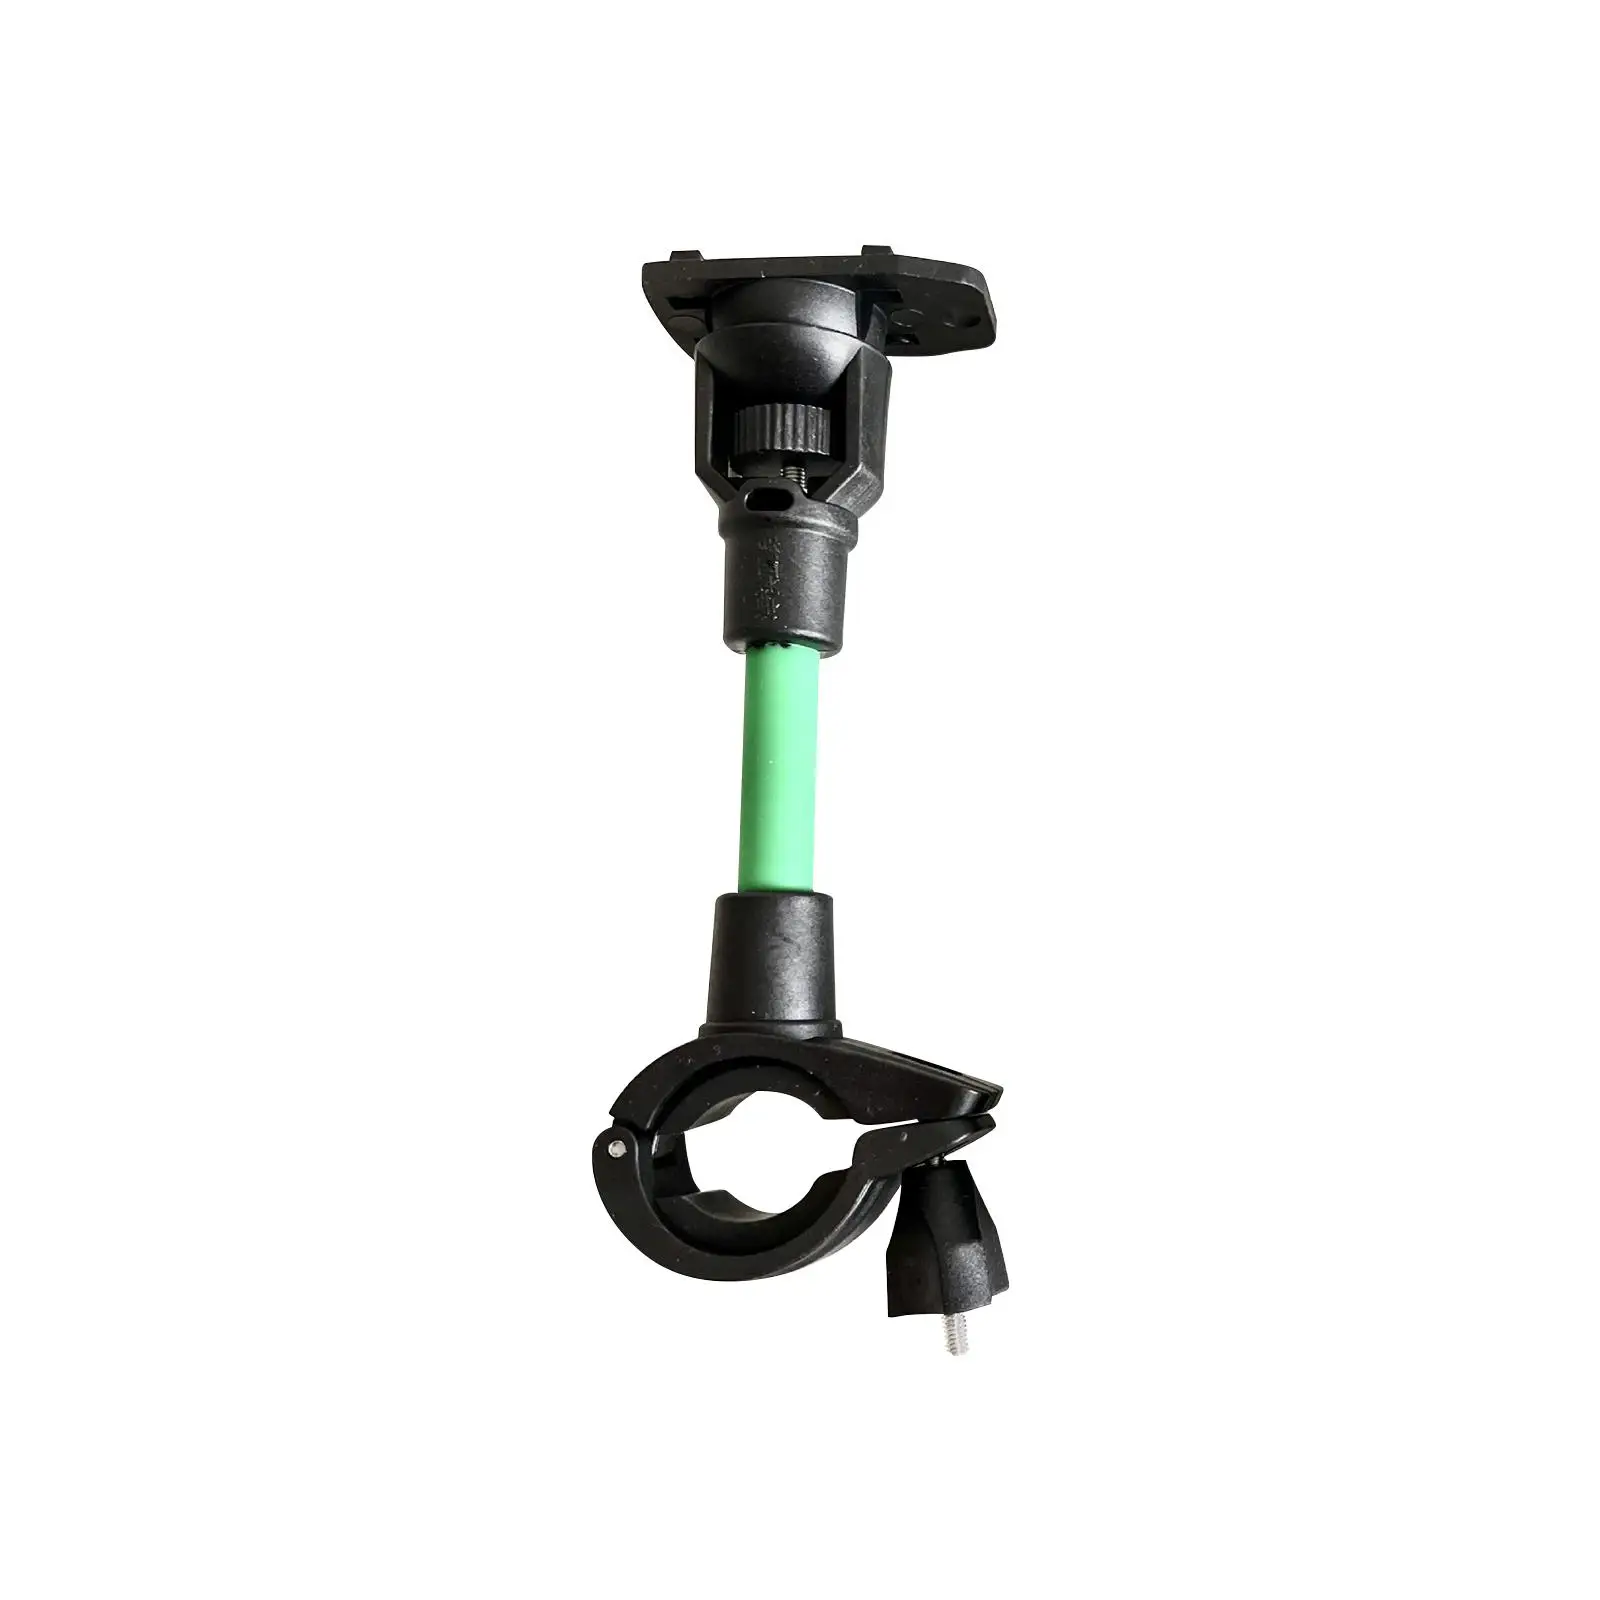 Fish Finders Clamp Mount for Fishing Pole 360 Adjustable Underwater Fishing Camera Holder for Electronic Mount Fish Finders